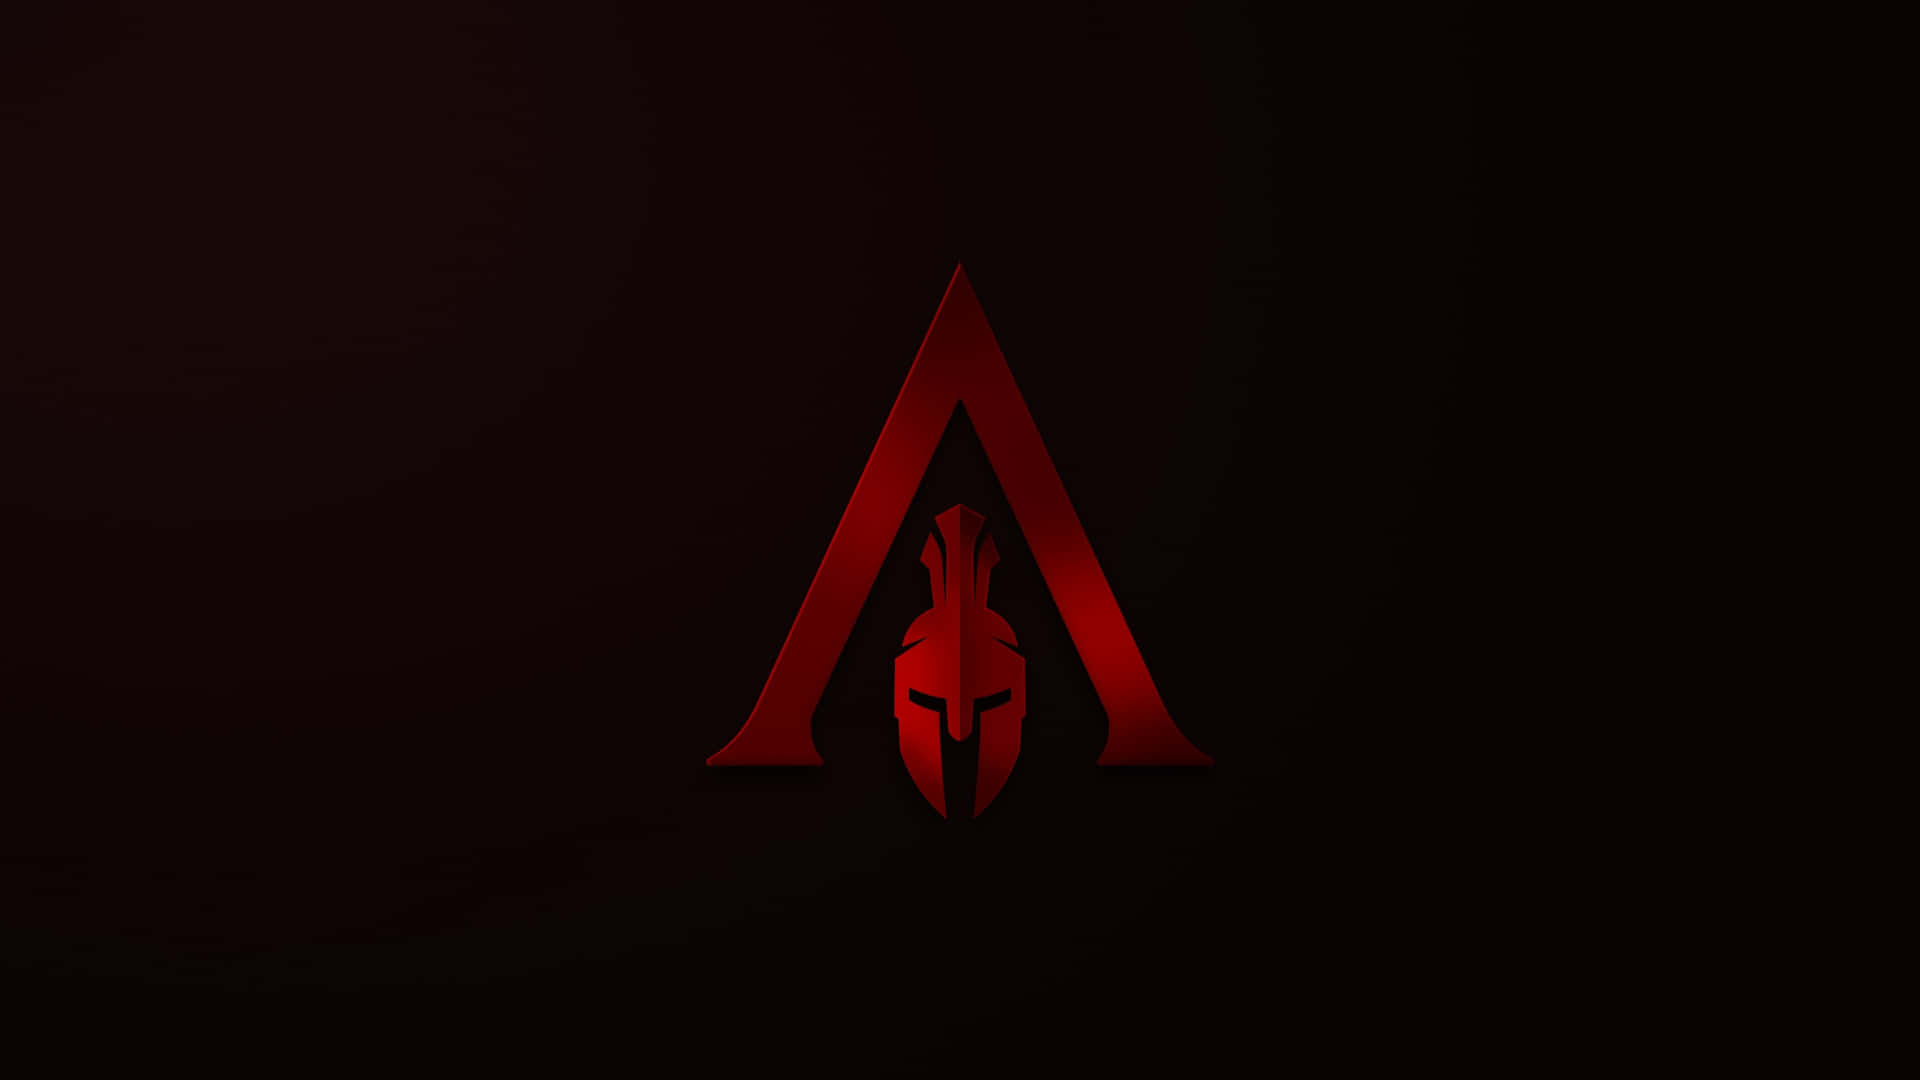 Spartan Logo 1440p Assassin's Creed Odyssey Background